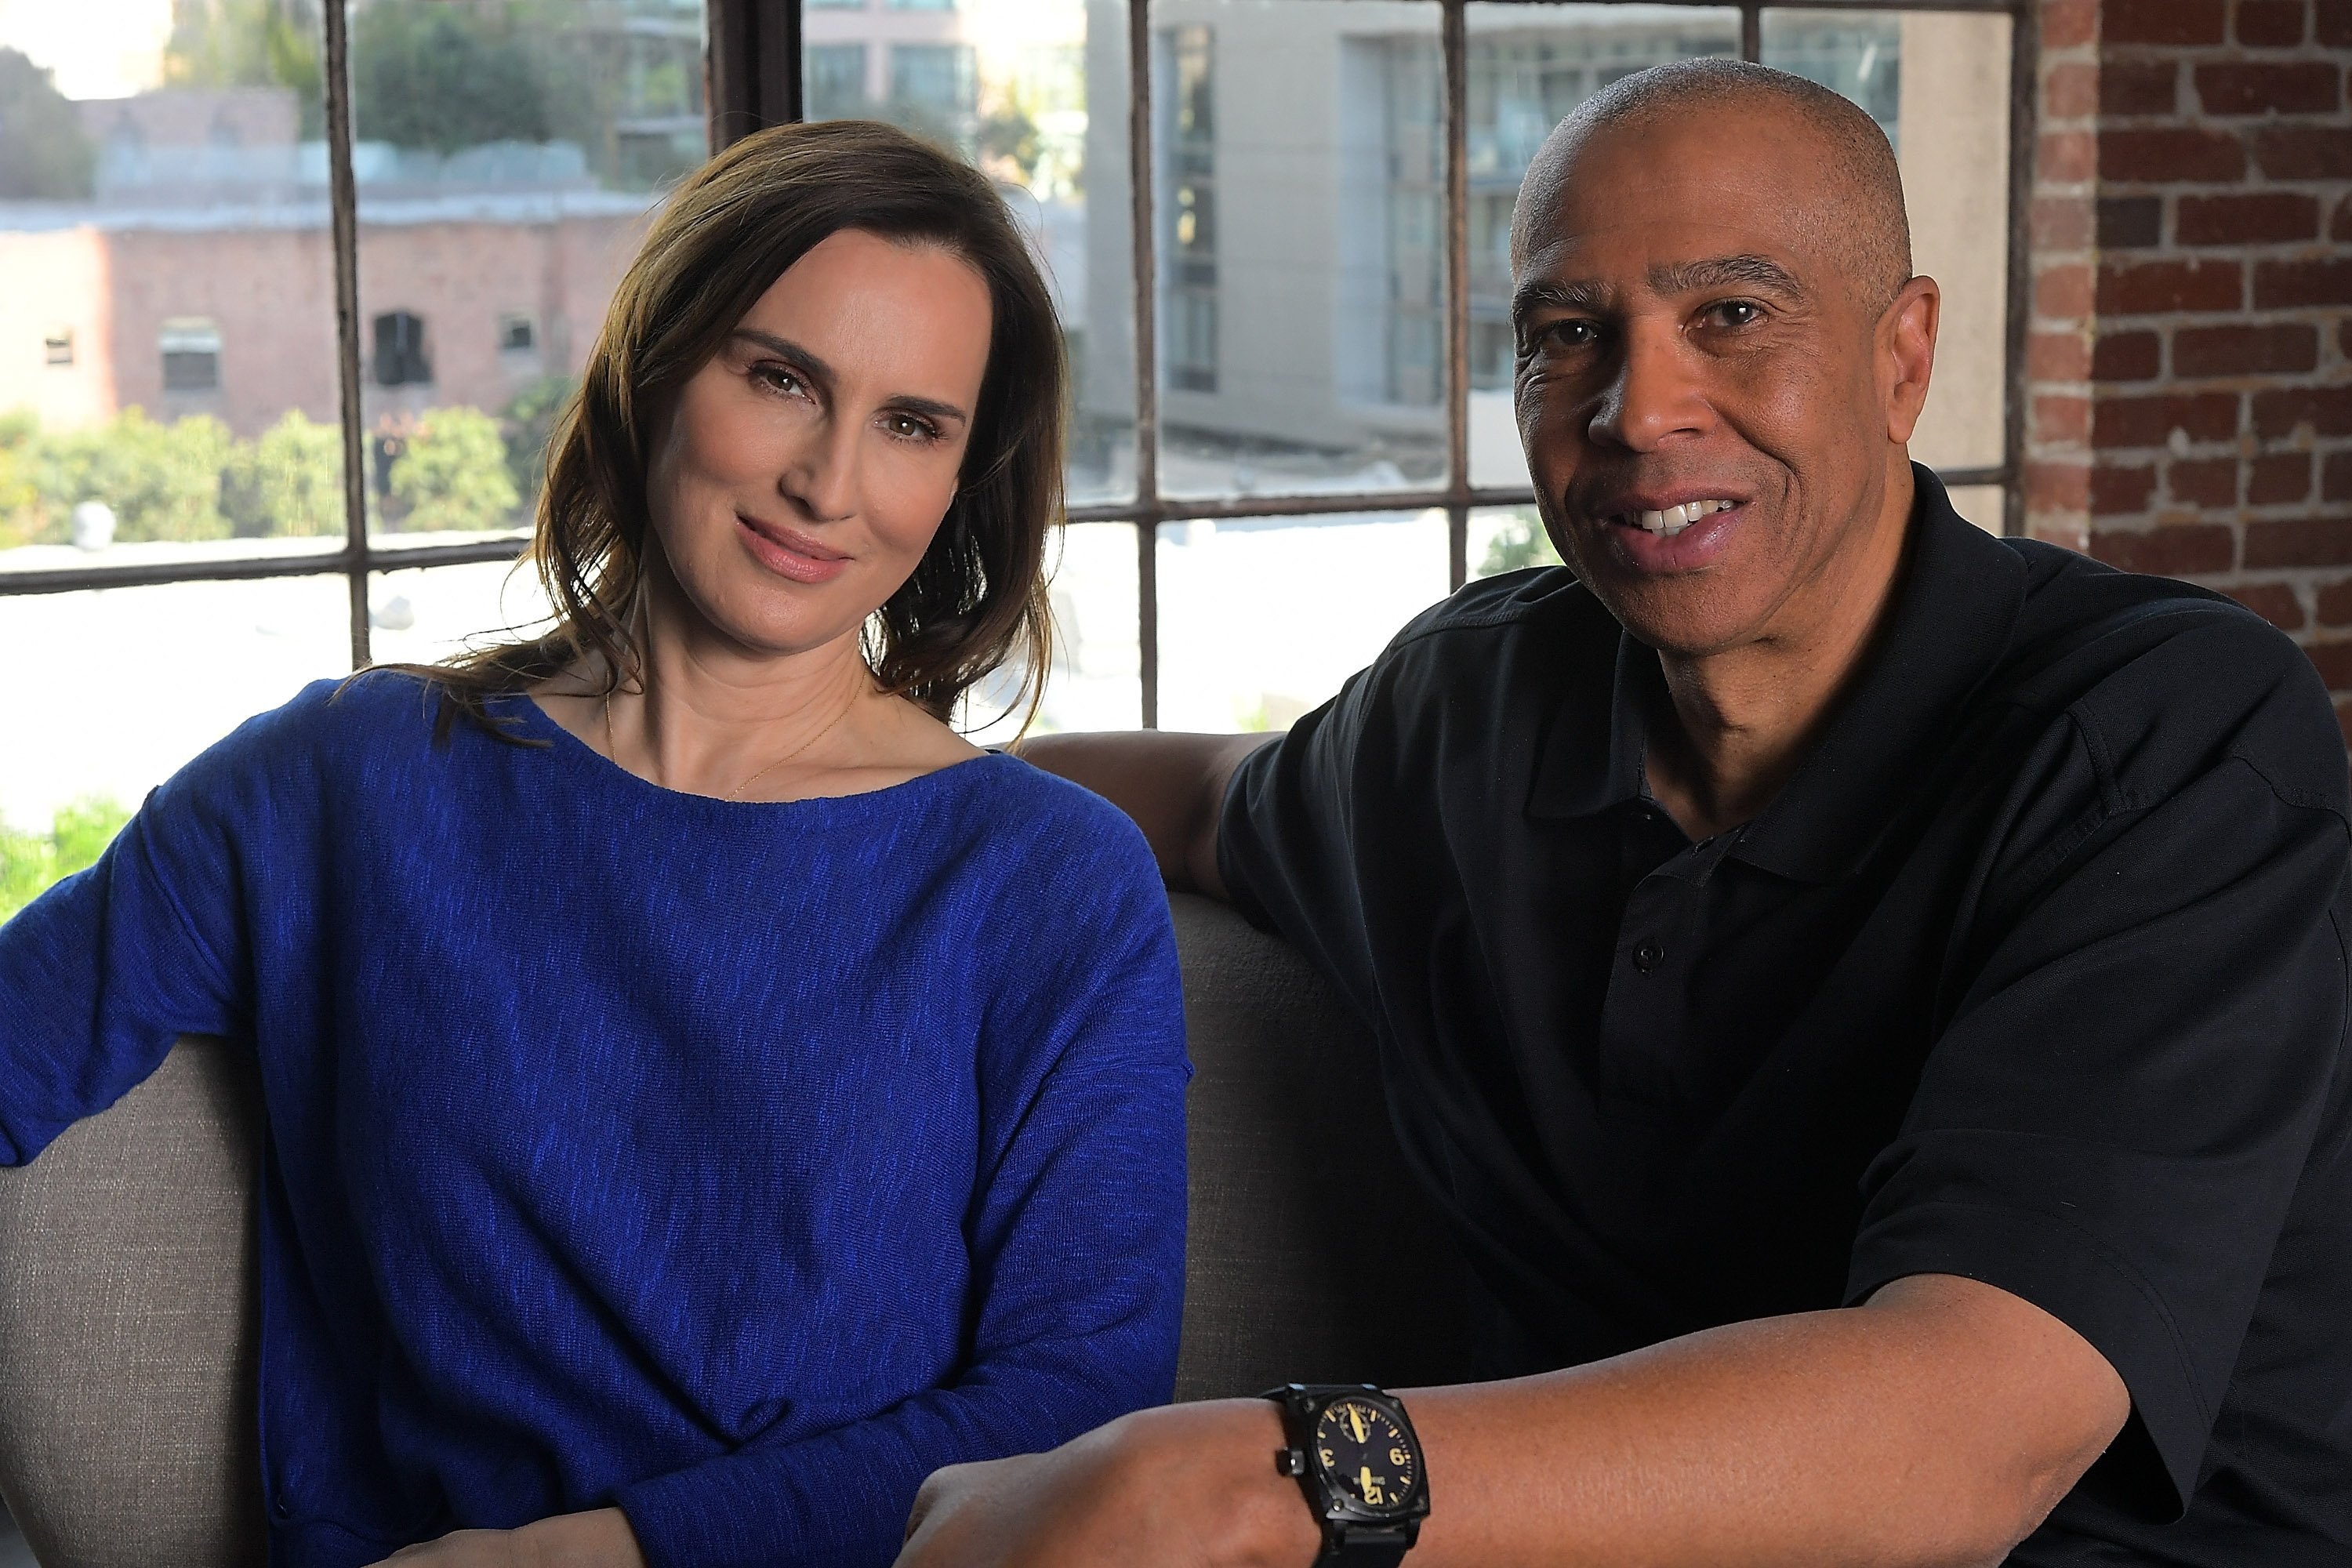 Julie Thompson and Mychal Thompson at the "Solid Foundation" video shoot in 2017 in Los Angeles, California. | Source: Getty Images